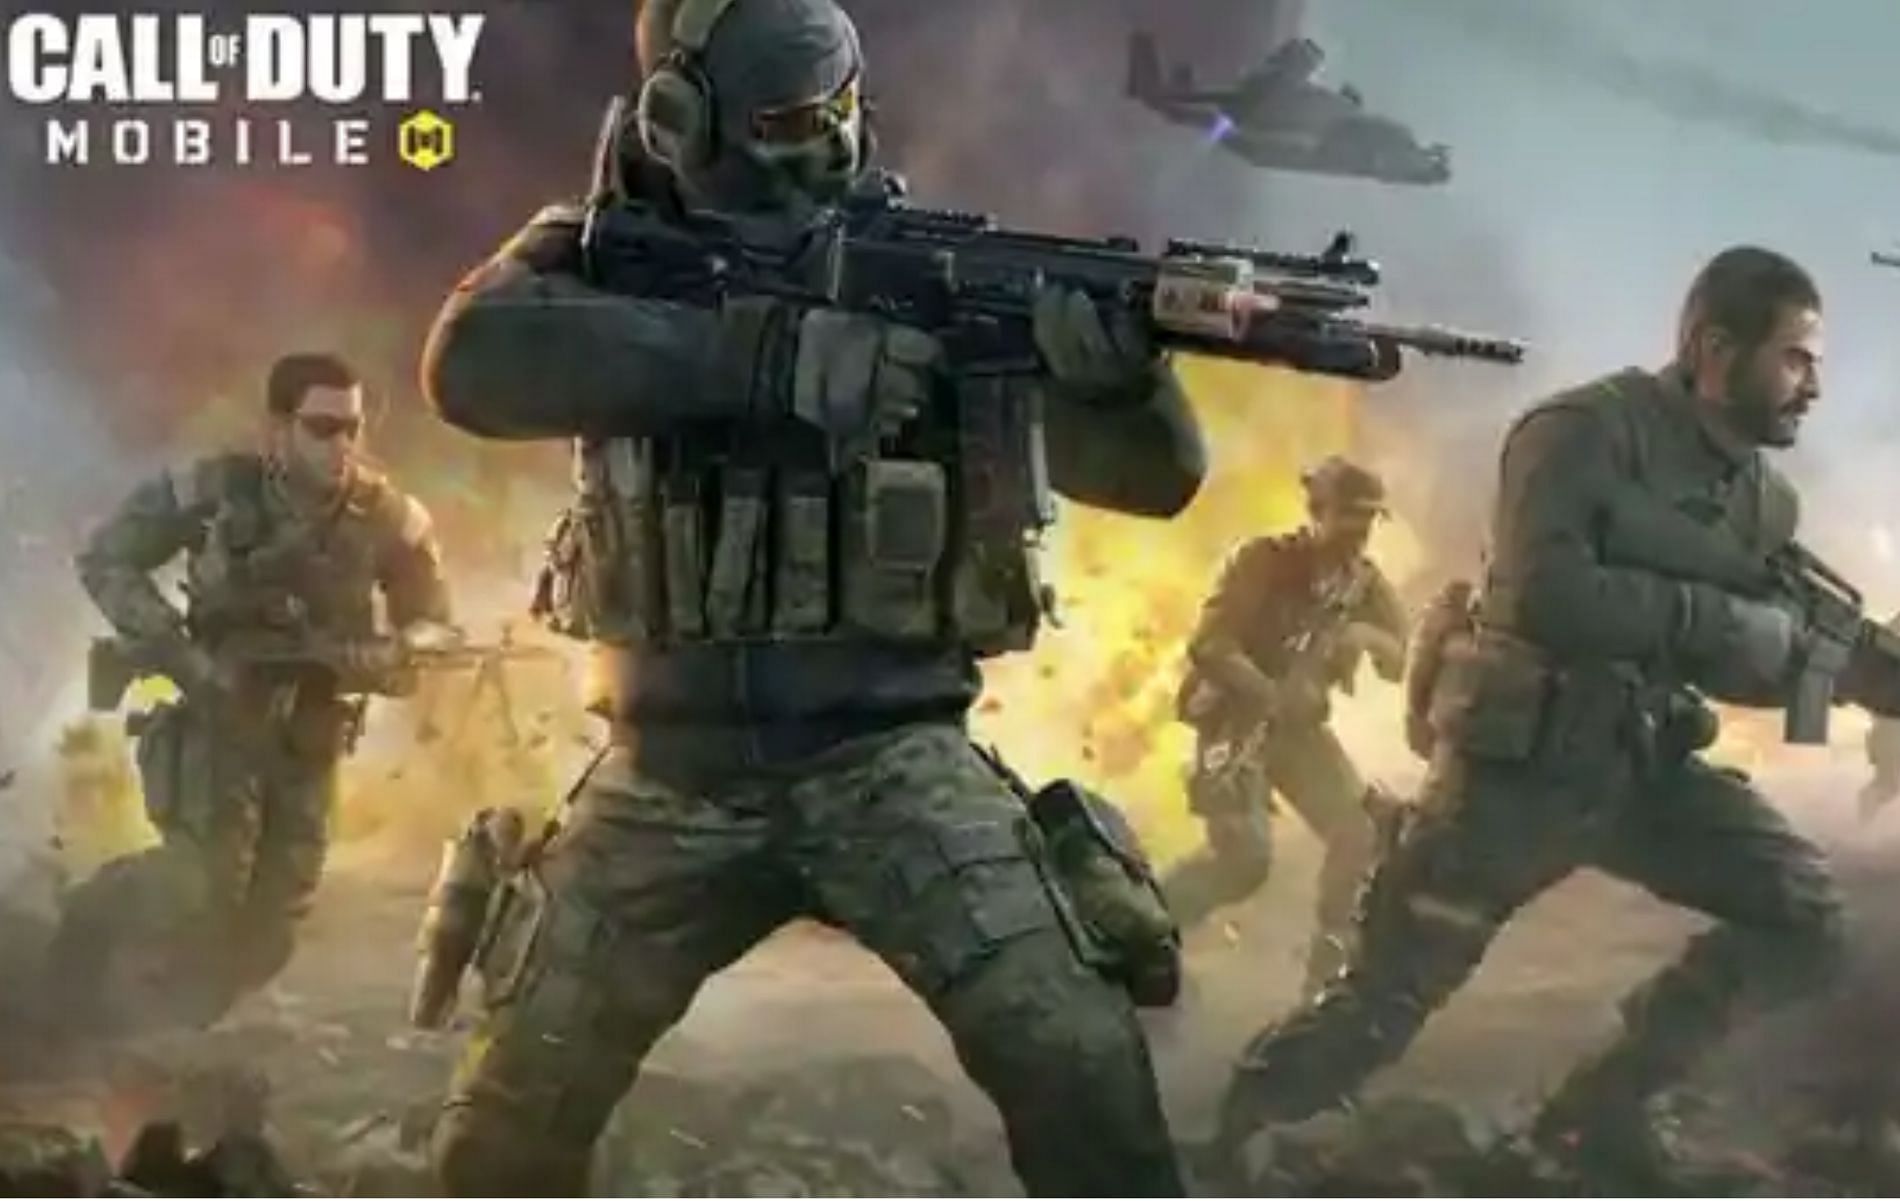 CoD Mobile Latest redeem codes: Call of Duty Mobile releases new codes